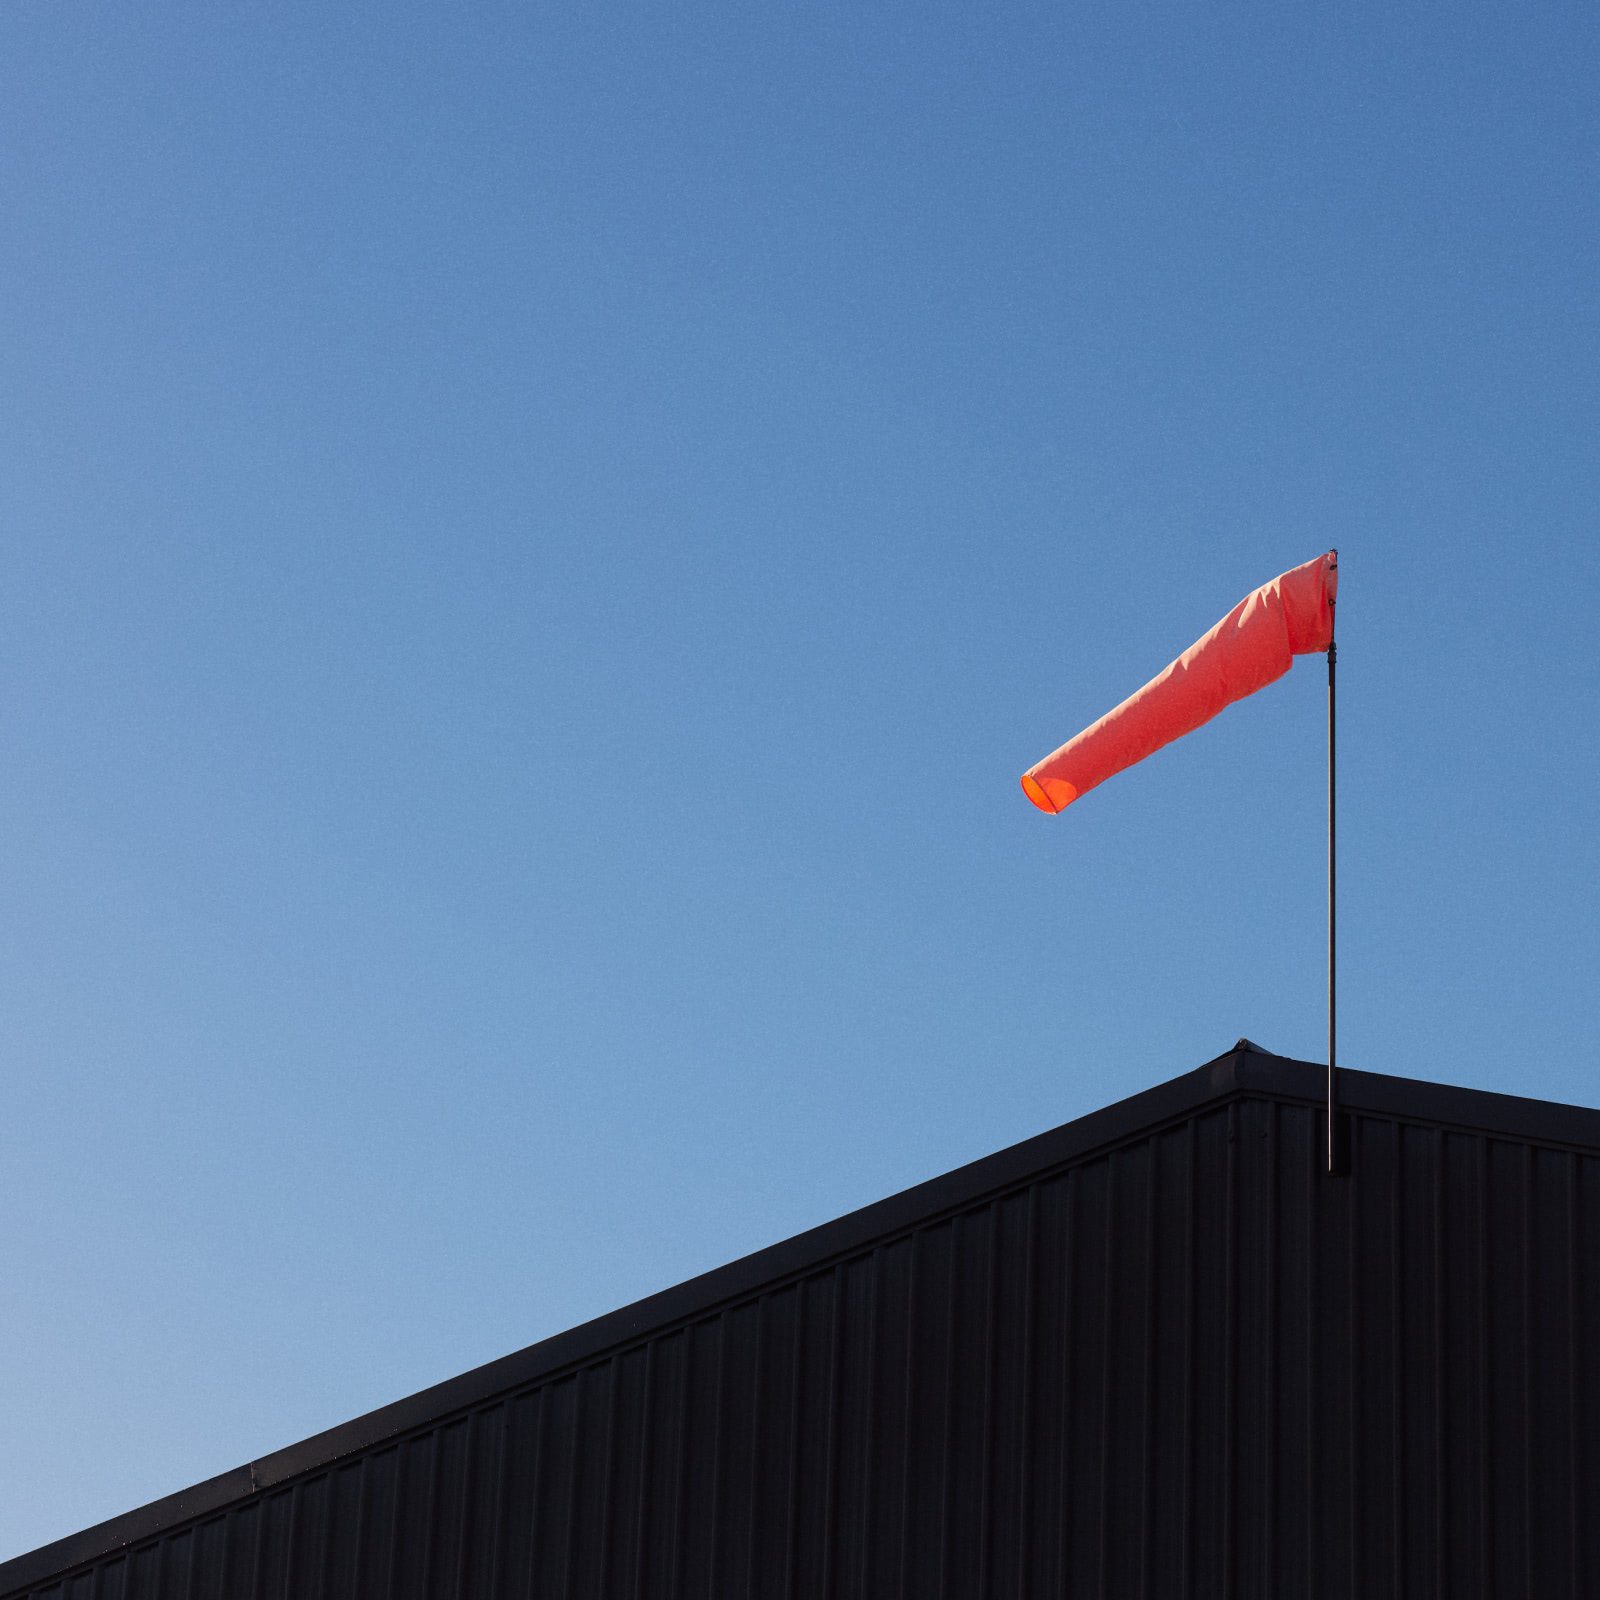 Ardmore red wind indicator flag with clear blue skies